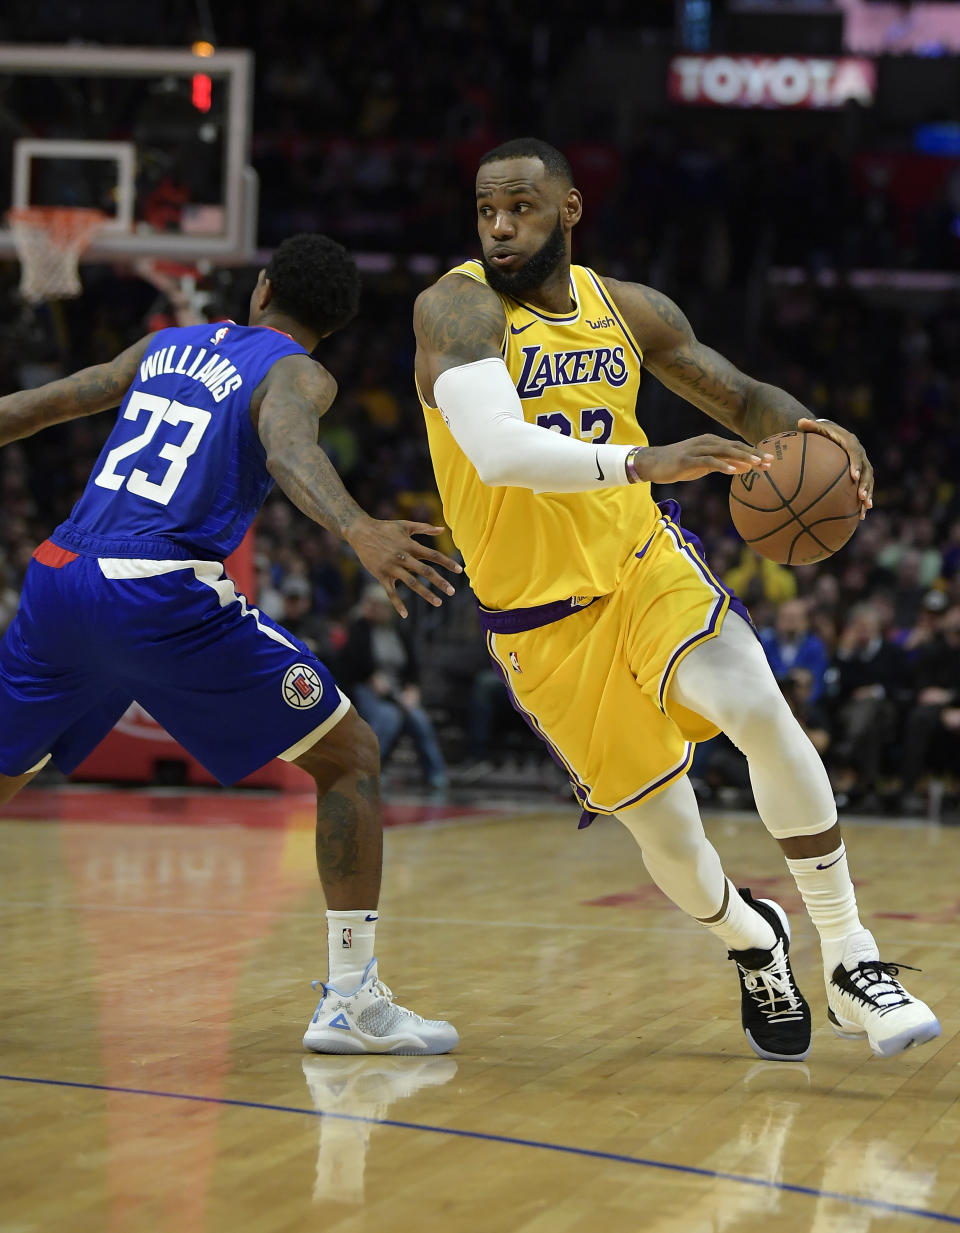 Los Angeles Lakers forward LeBron James, right, drives by Los Angeles Clippers guard Lou Williams during the second half of an NBA basketball game Thursday, Jan. 31, 2019, in Los Angeles. The Lakers won 123-120. (AP Photo/Mark J. Terrill)